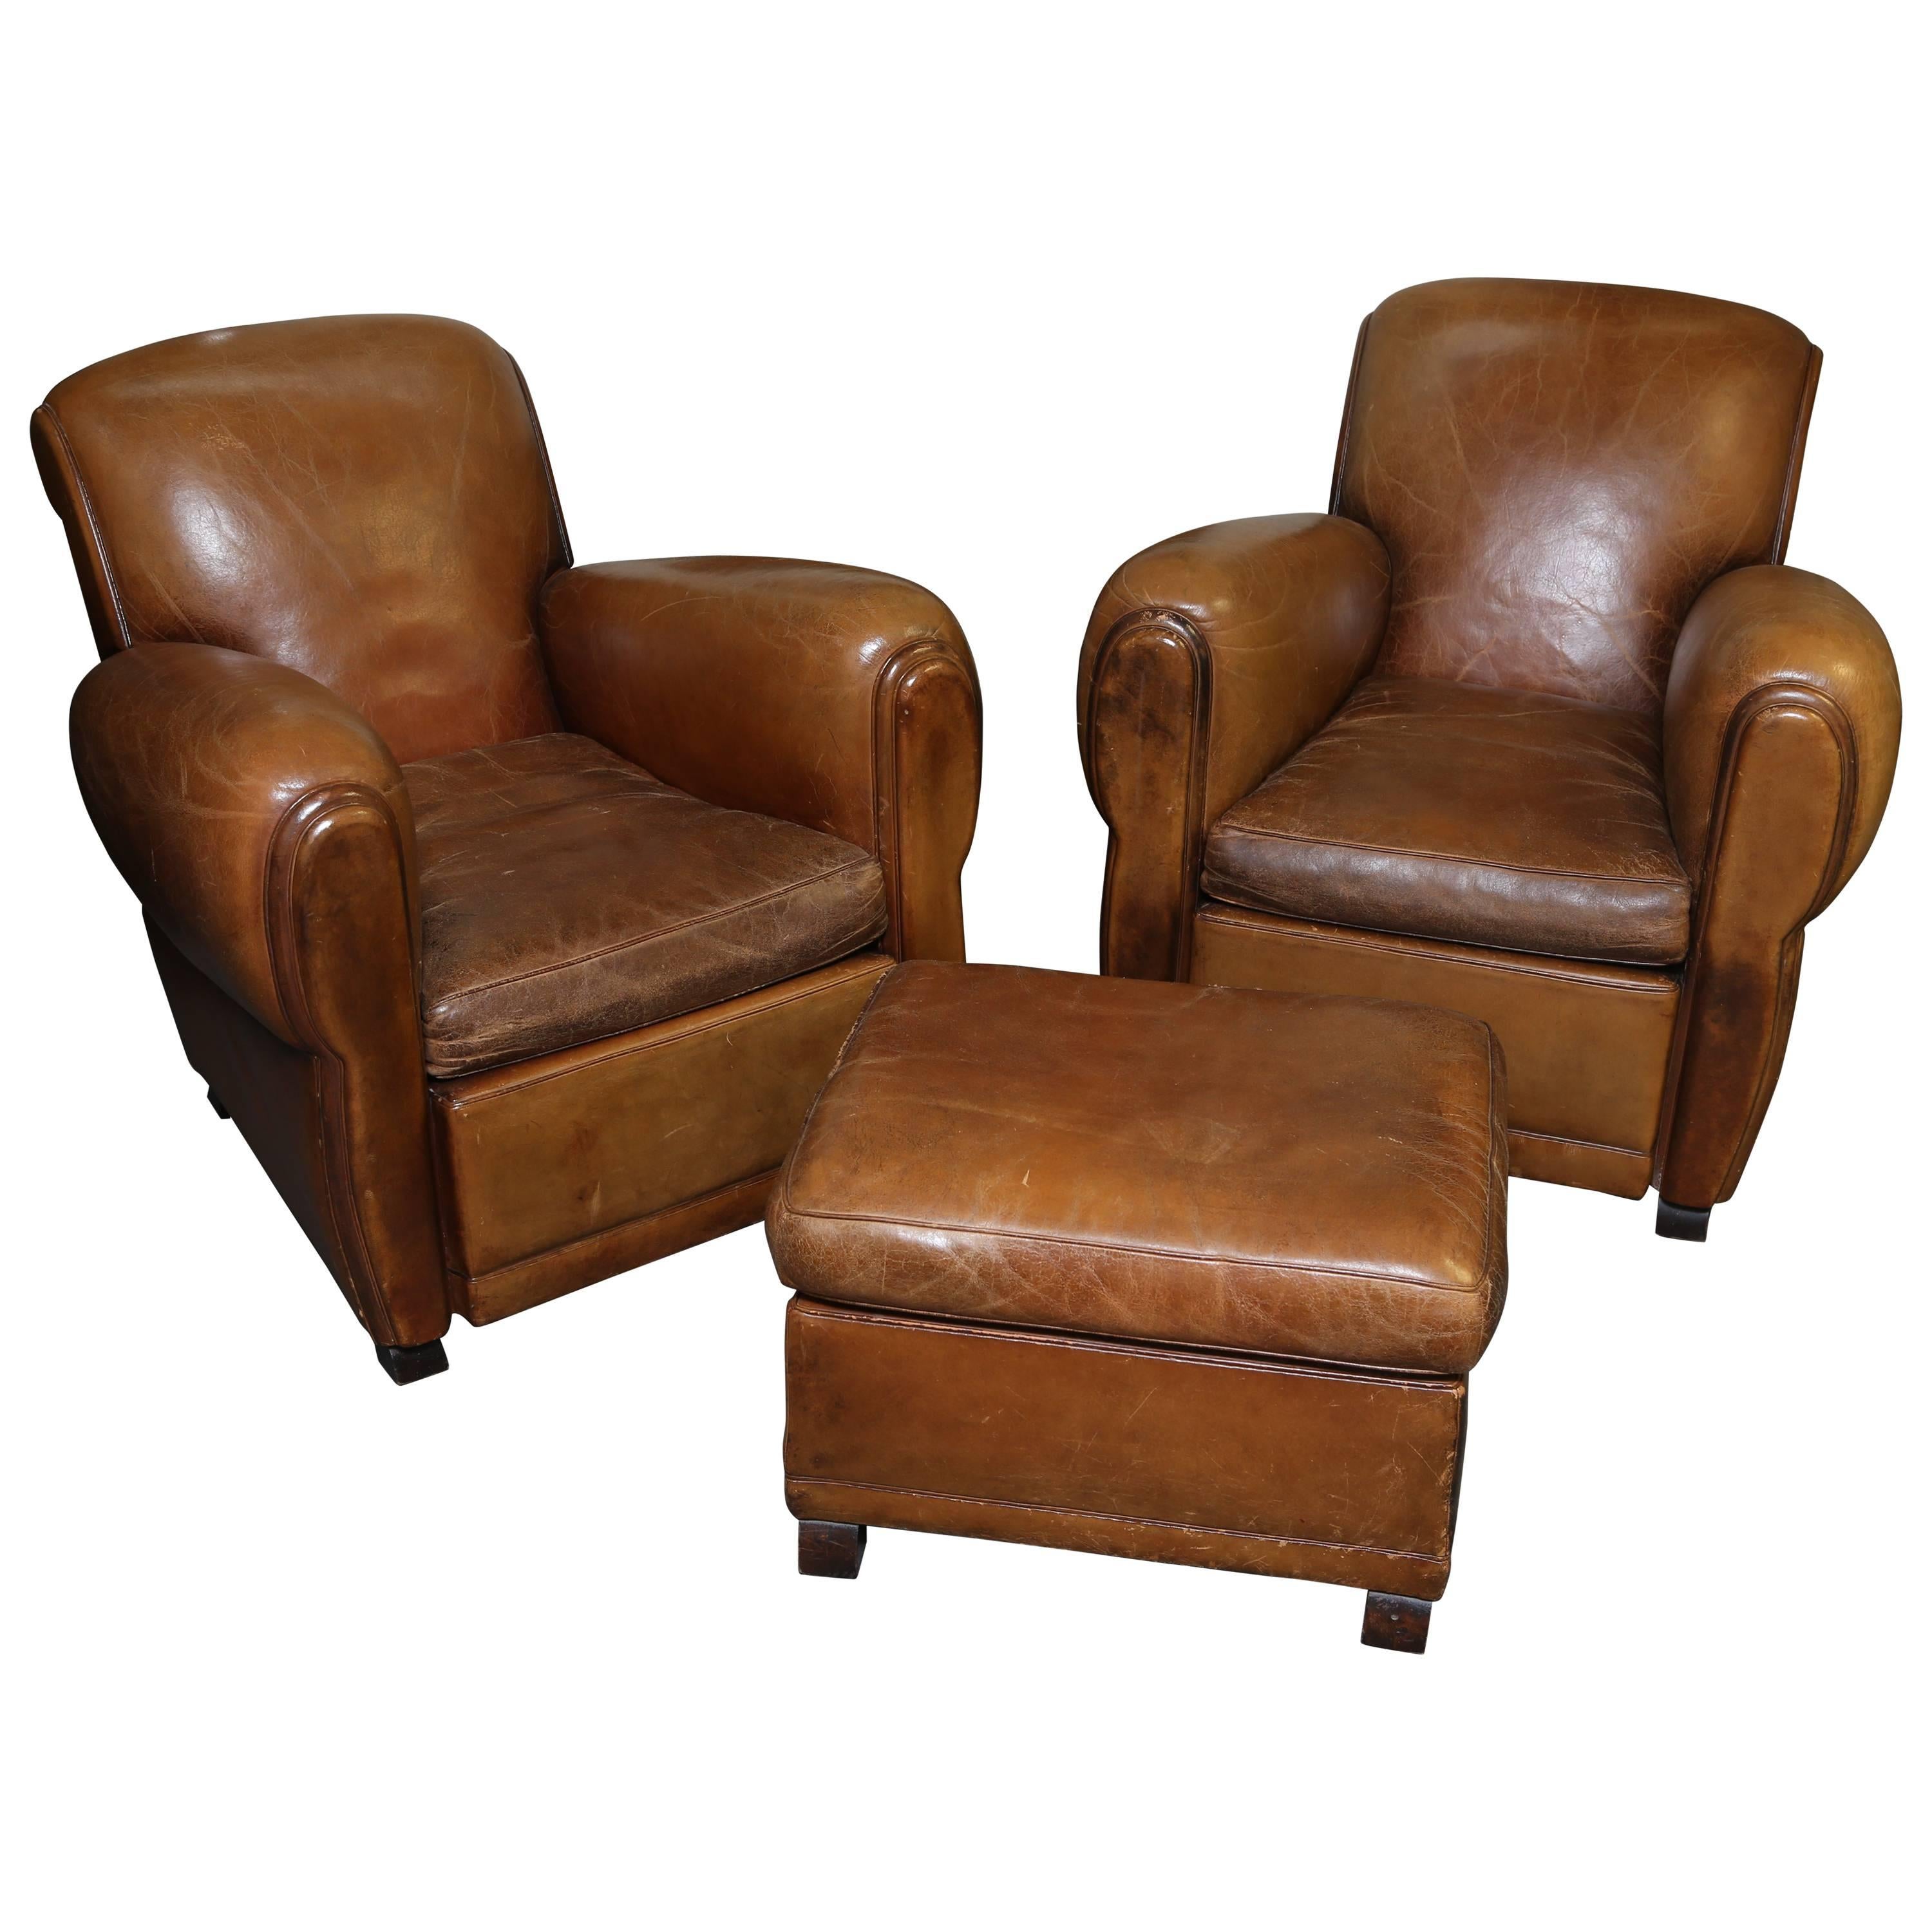 French Art Deco Leather Chairs with Ottoman